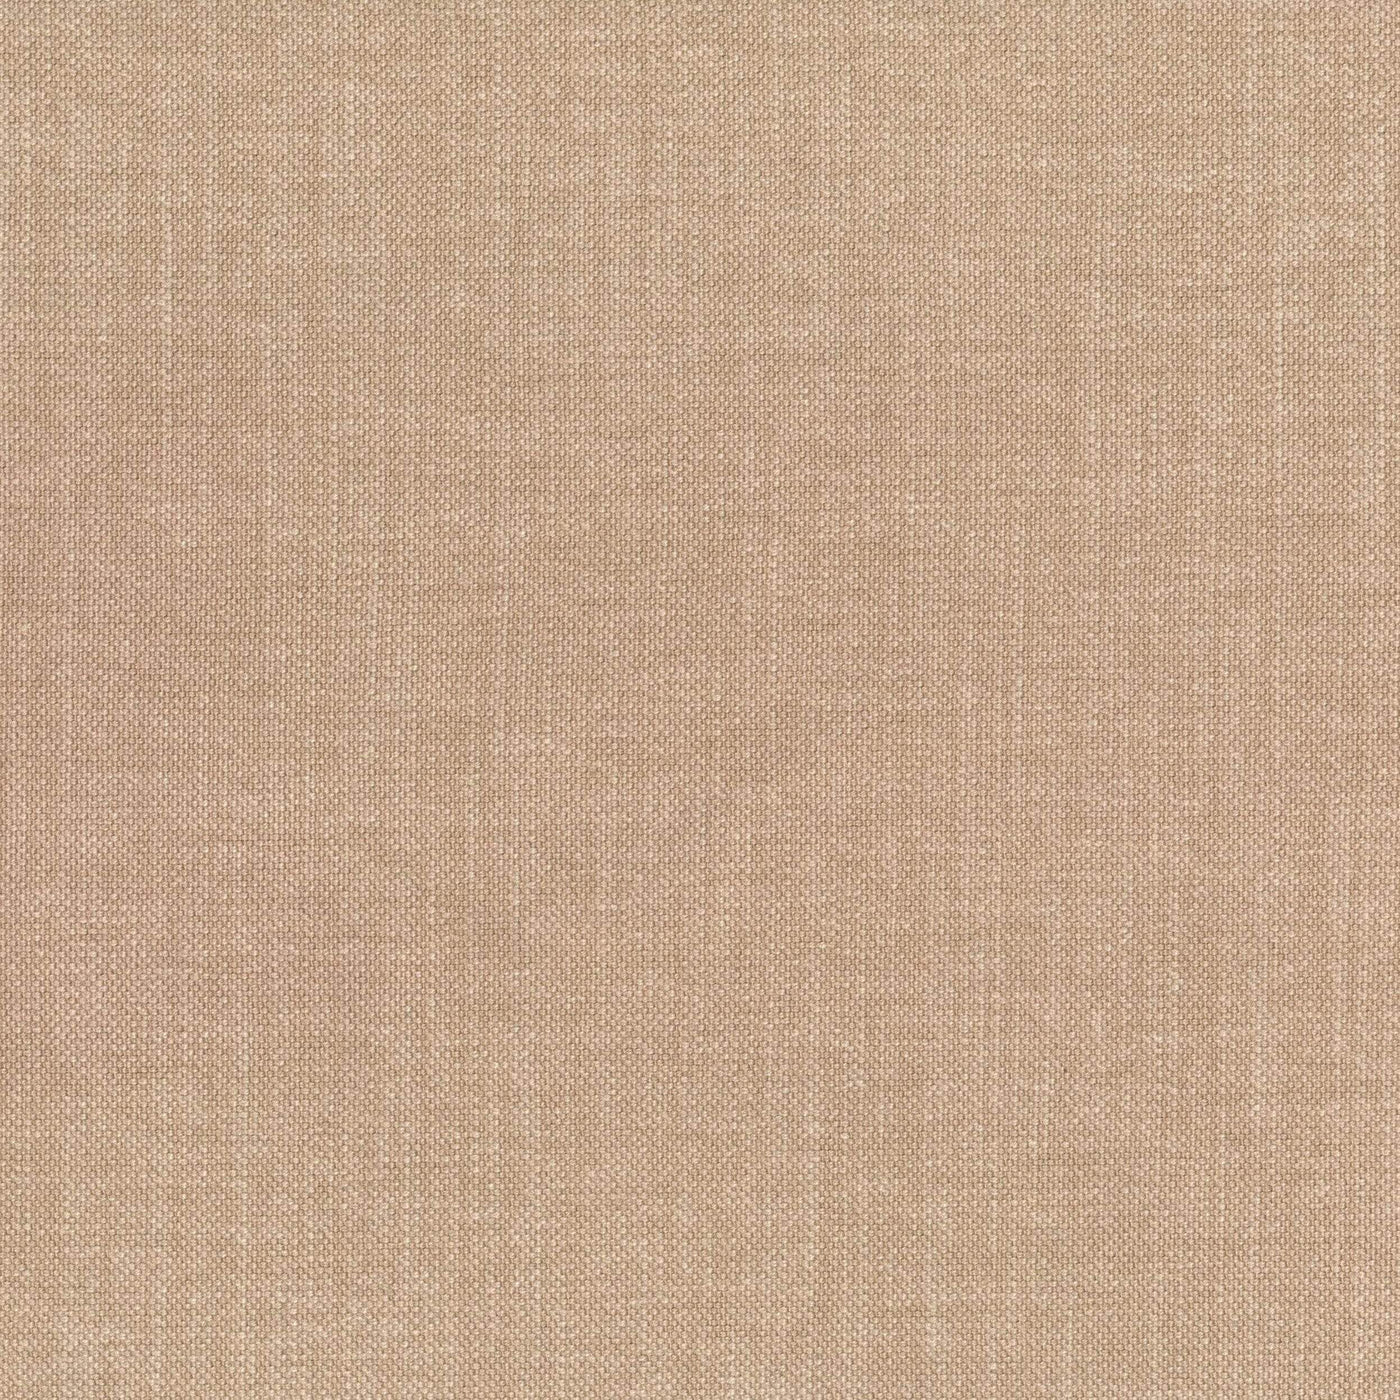 Pure 04 nude pink upholstery fabric made to order for someday designs Toft sofas. Order free fabric swatches at someday designs. 